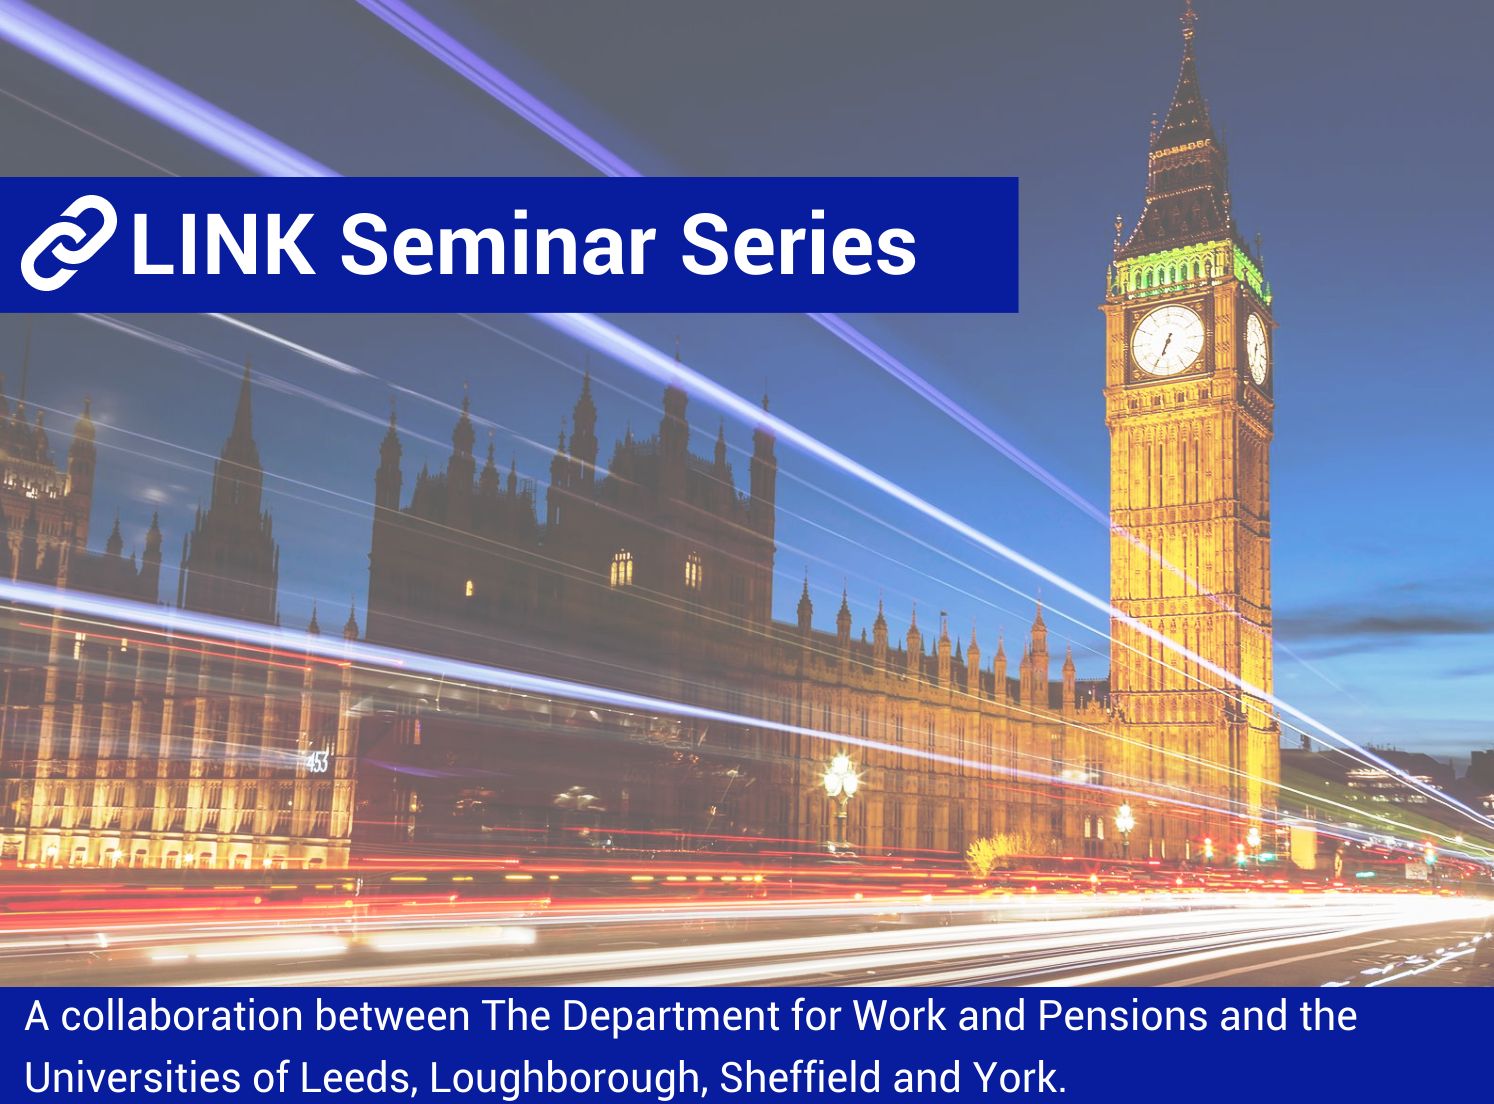 Graphic saying Link Seminar Series on top of a photograph of the Houses of Parliament